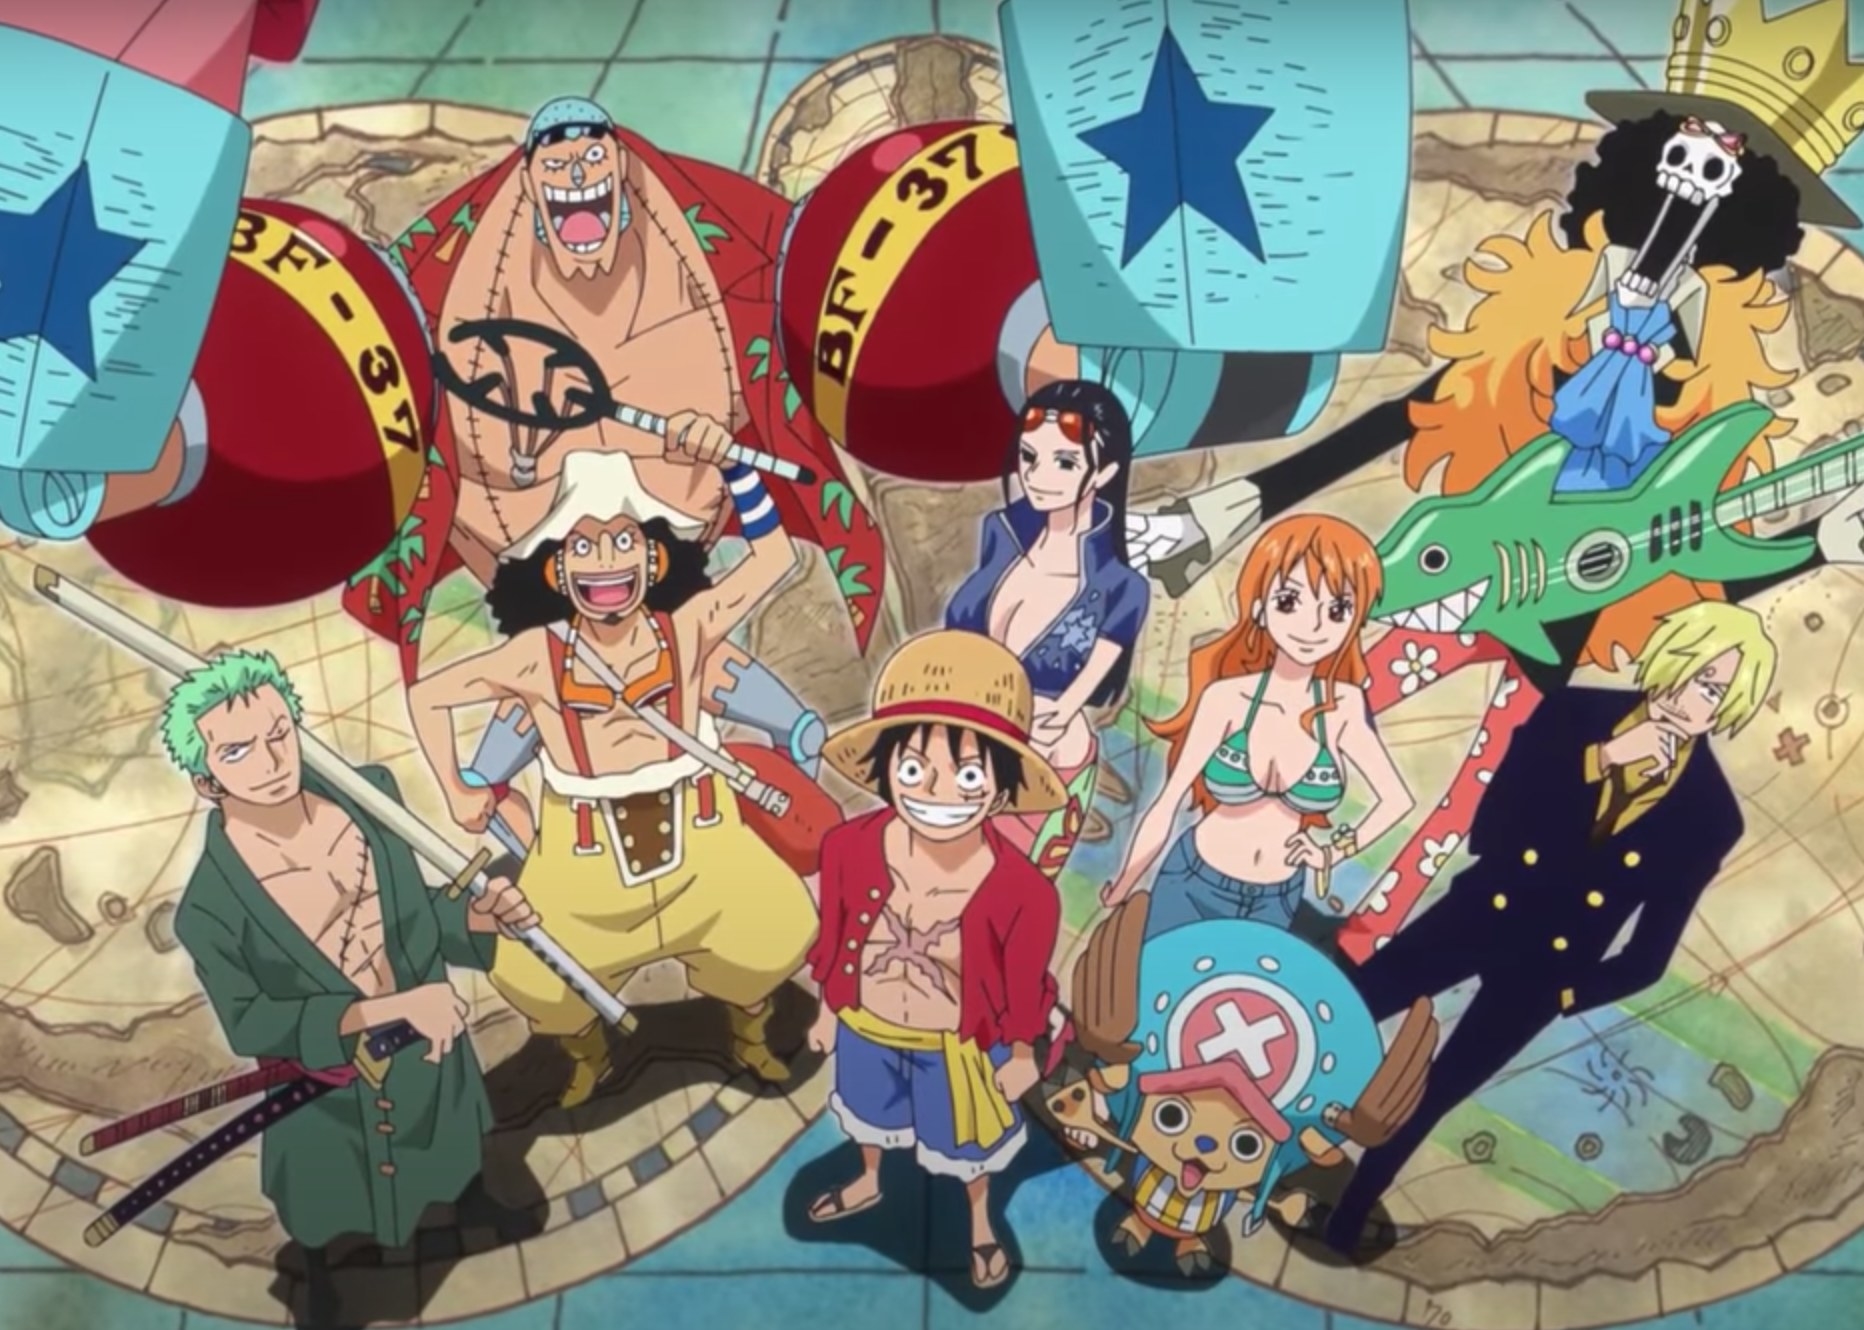 A group picture of the Straw Hat Pirates posing